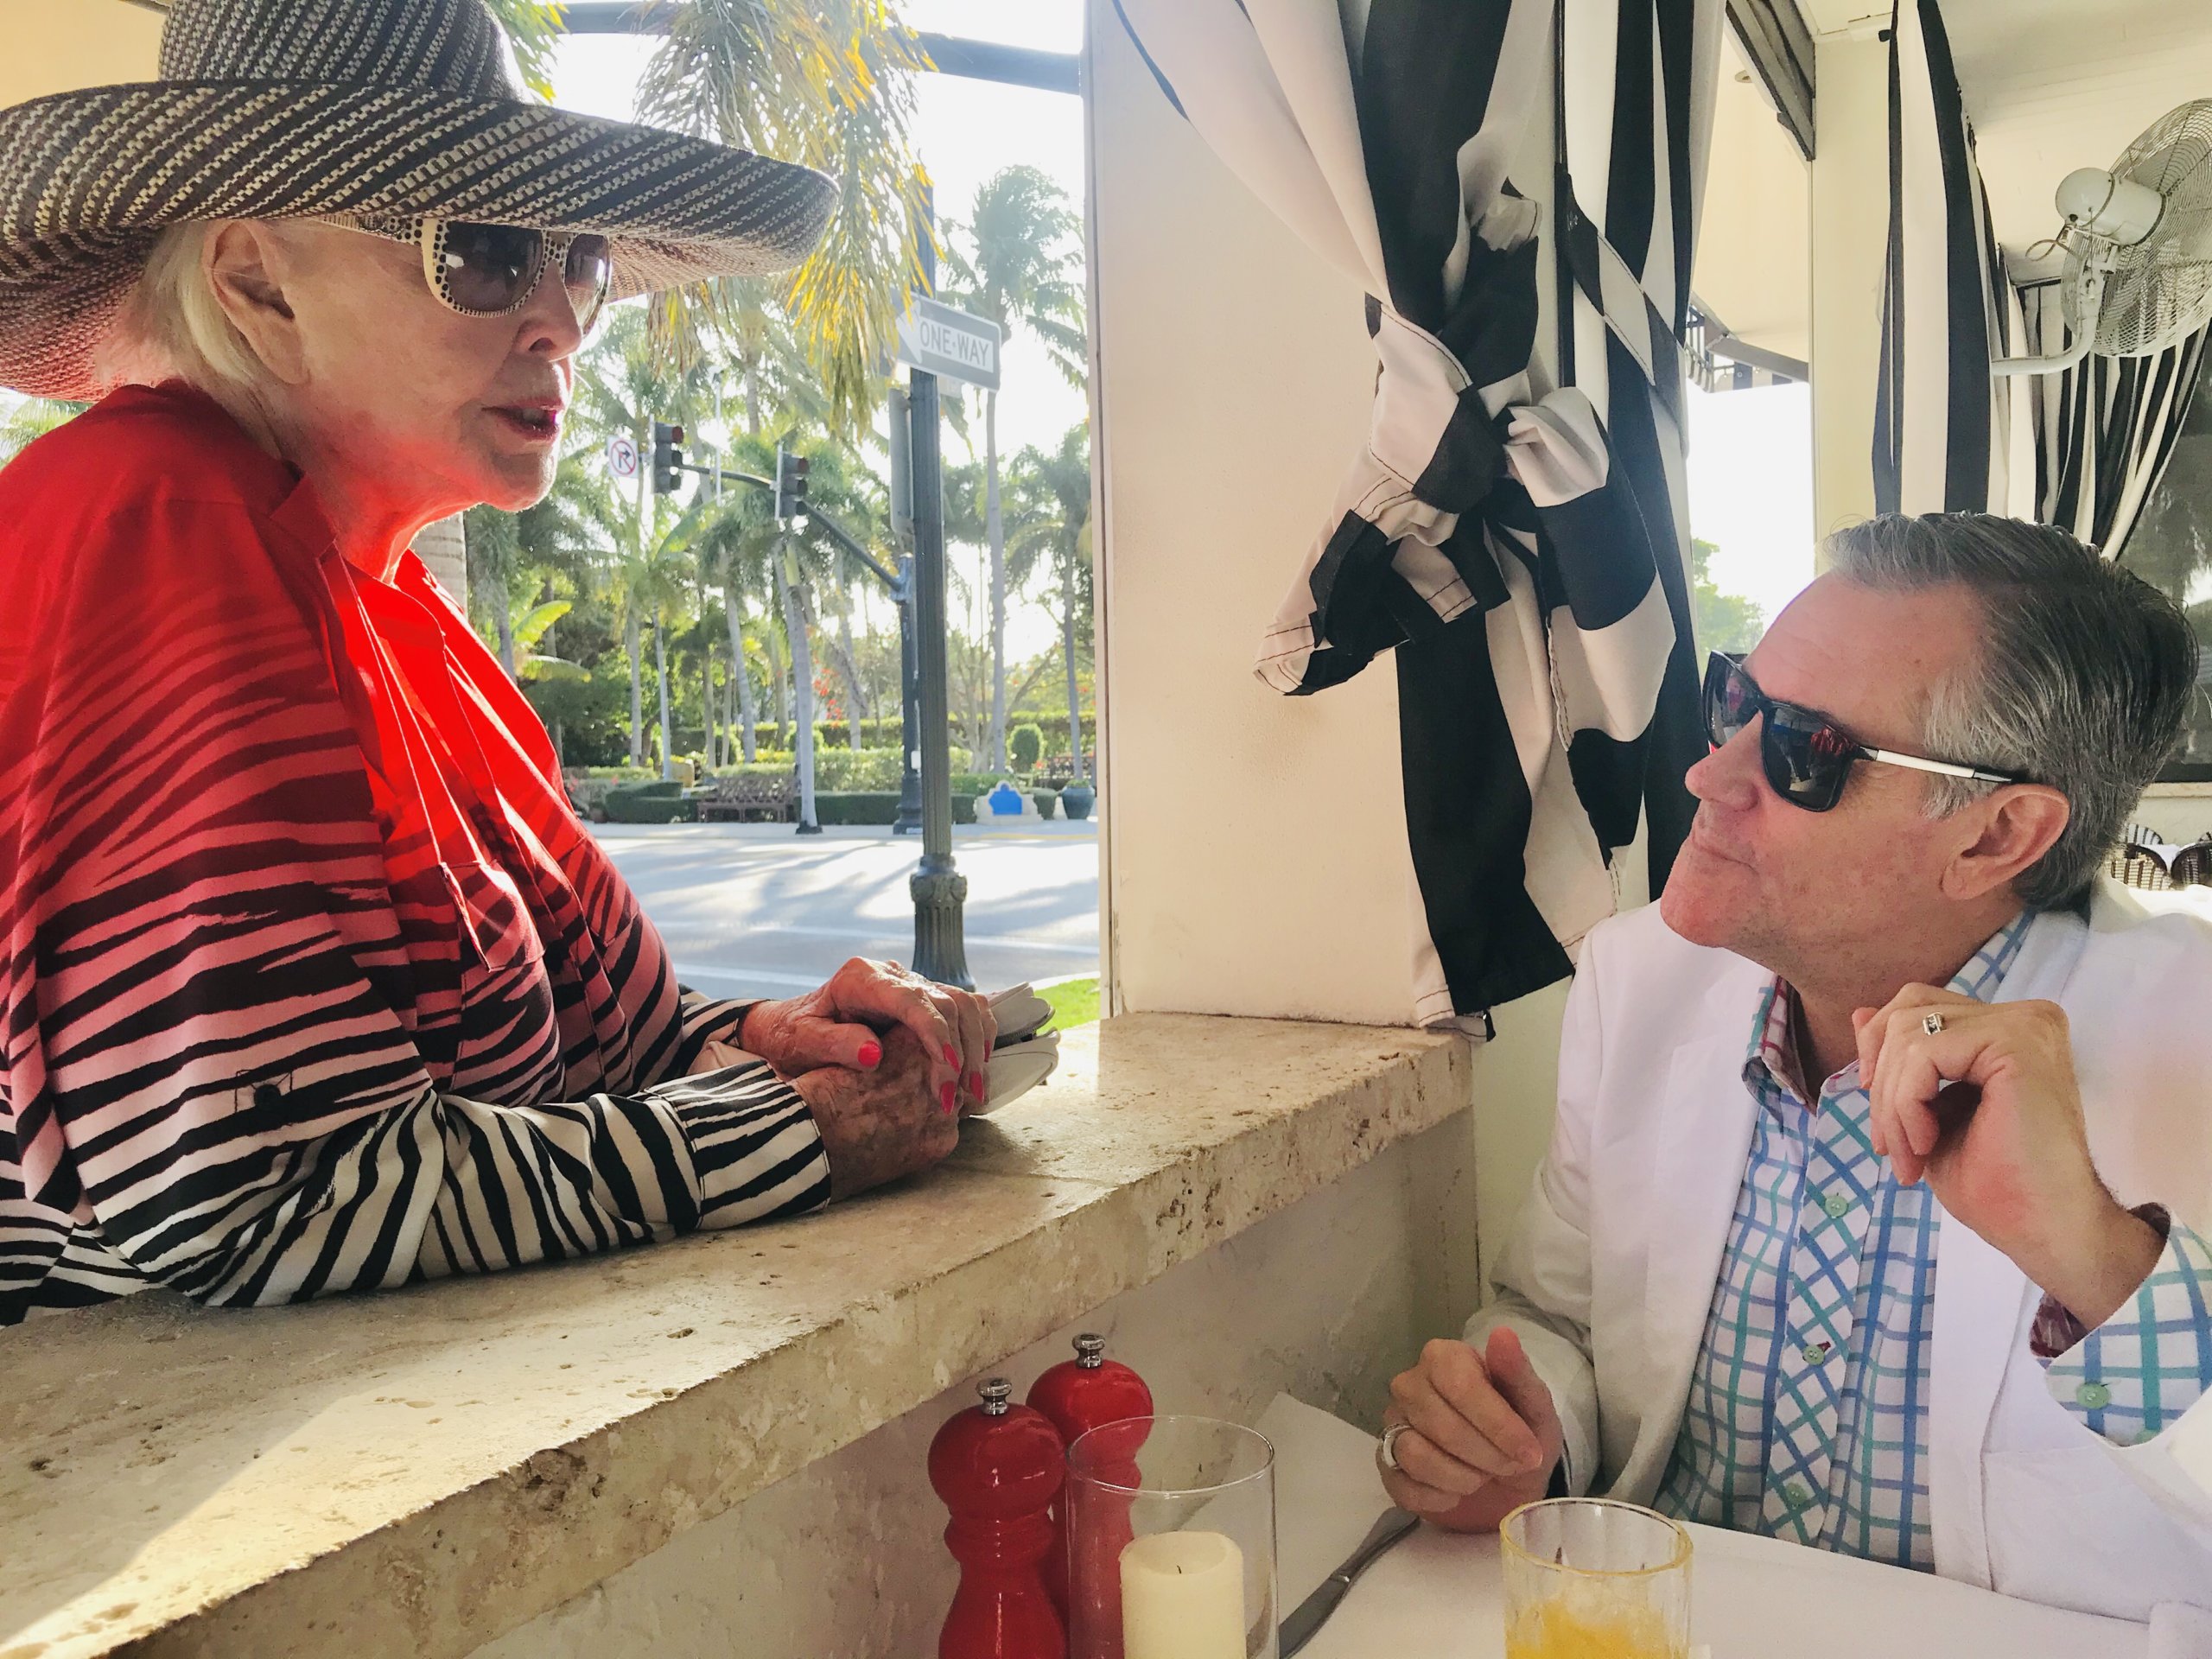 Popular Palm Beach entertainer Rob Russell, whose family docked their yacht "The Mother Marion" for decades in Sag Harbor, chats with Jean Dolan, founder of the Jazz Society of Palm Beach, at the Bricktops Restaurant